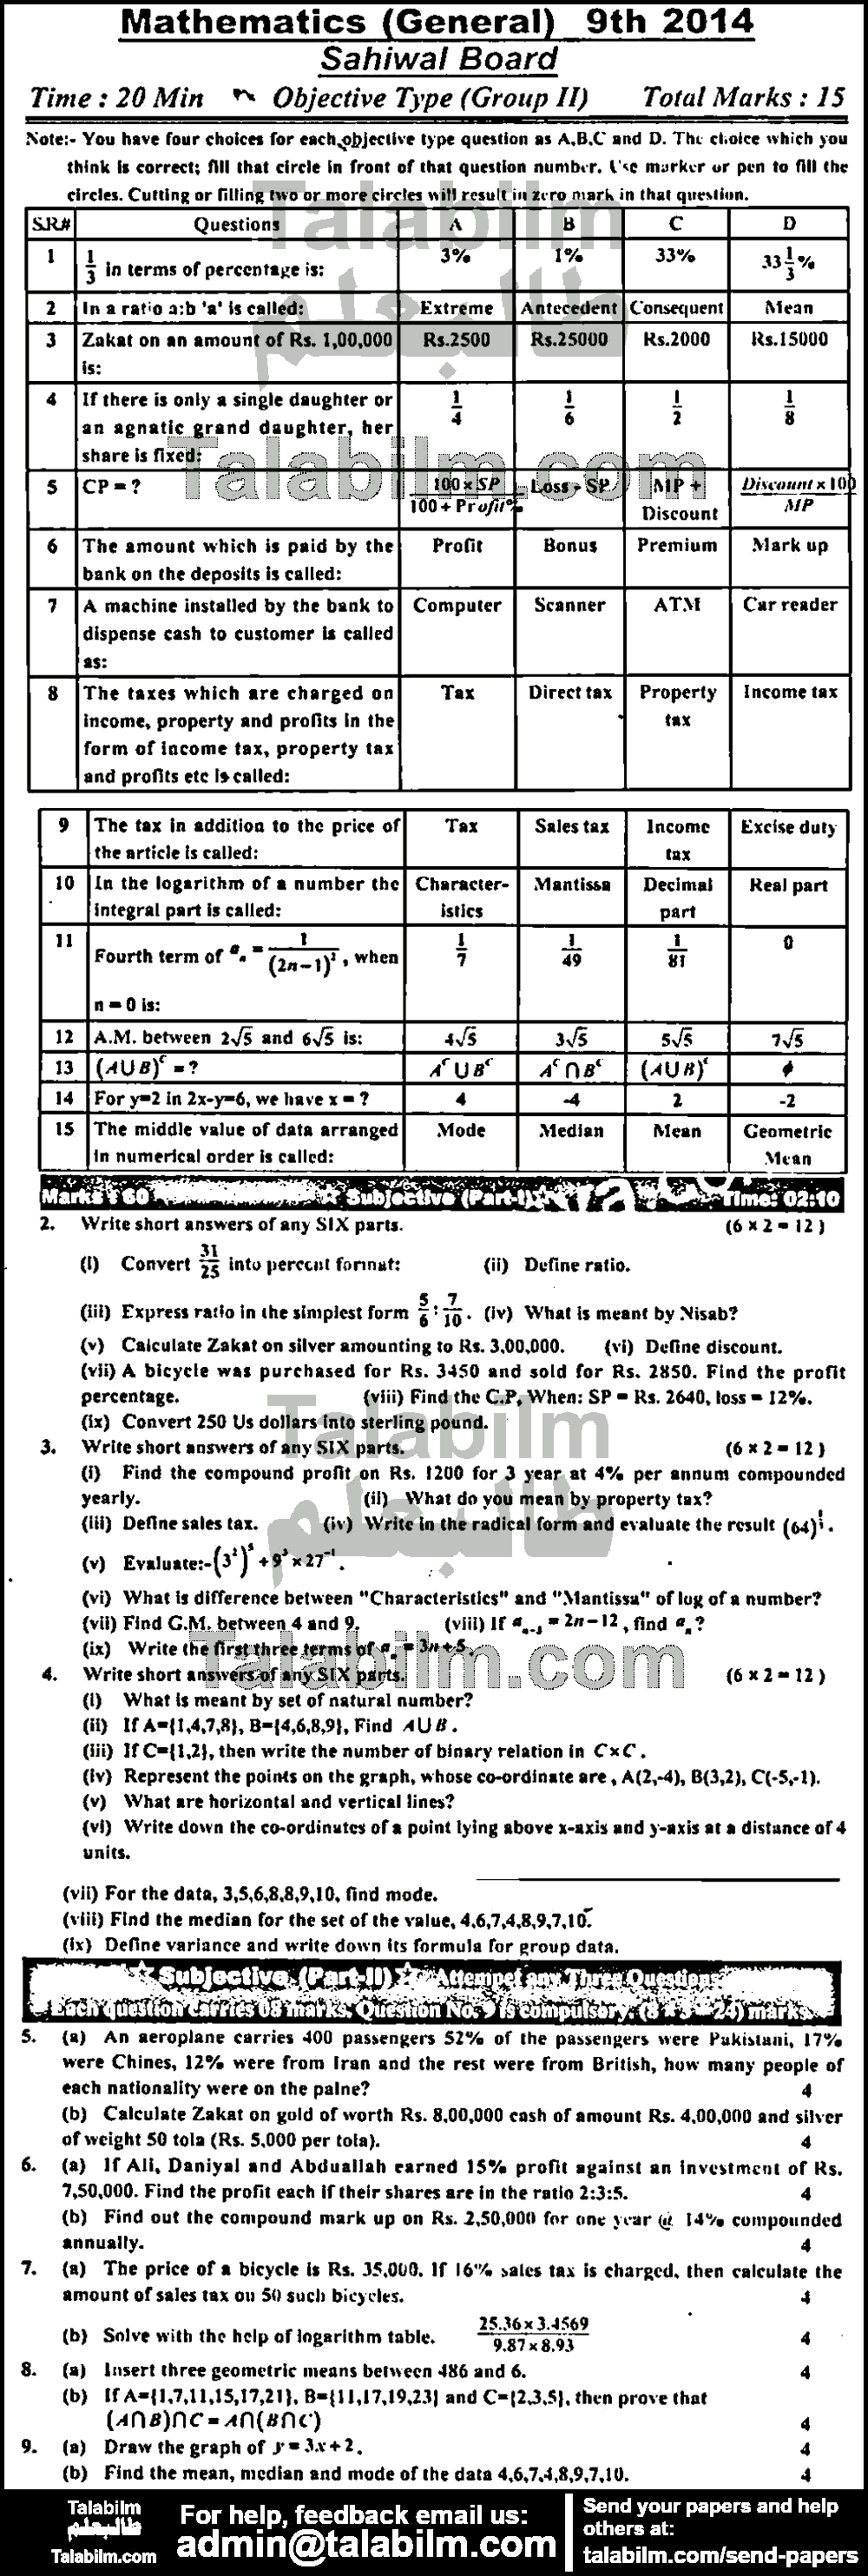 General Math 0 past paper for English Medium 2014 Group-II